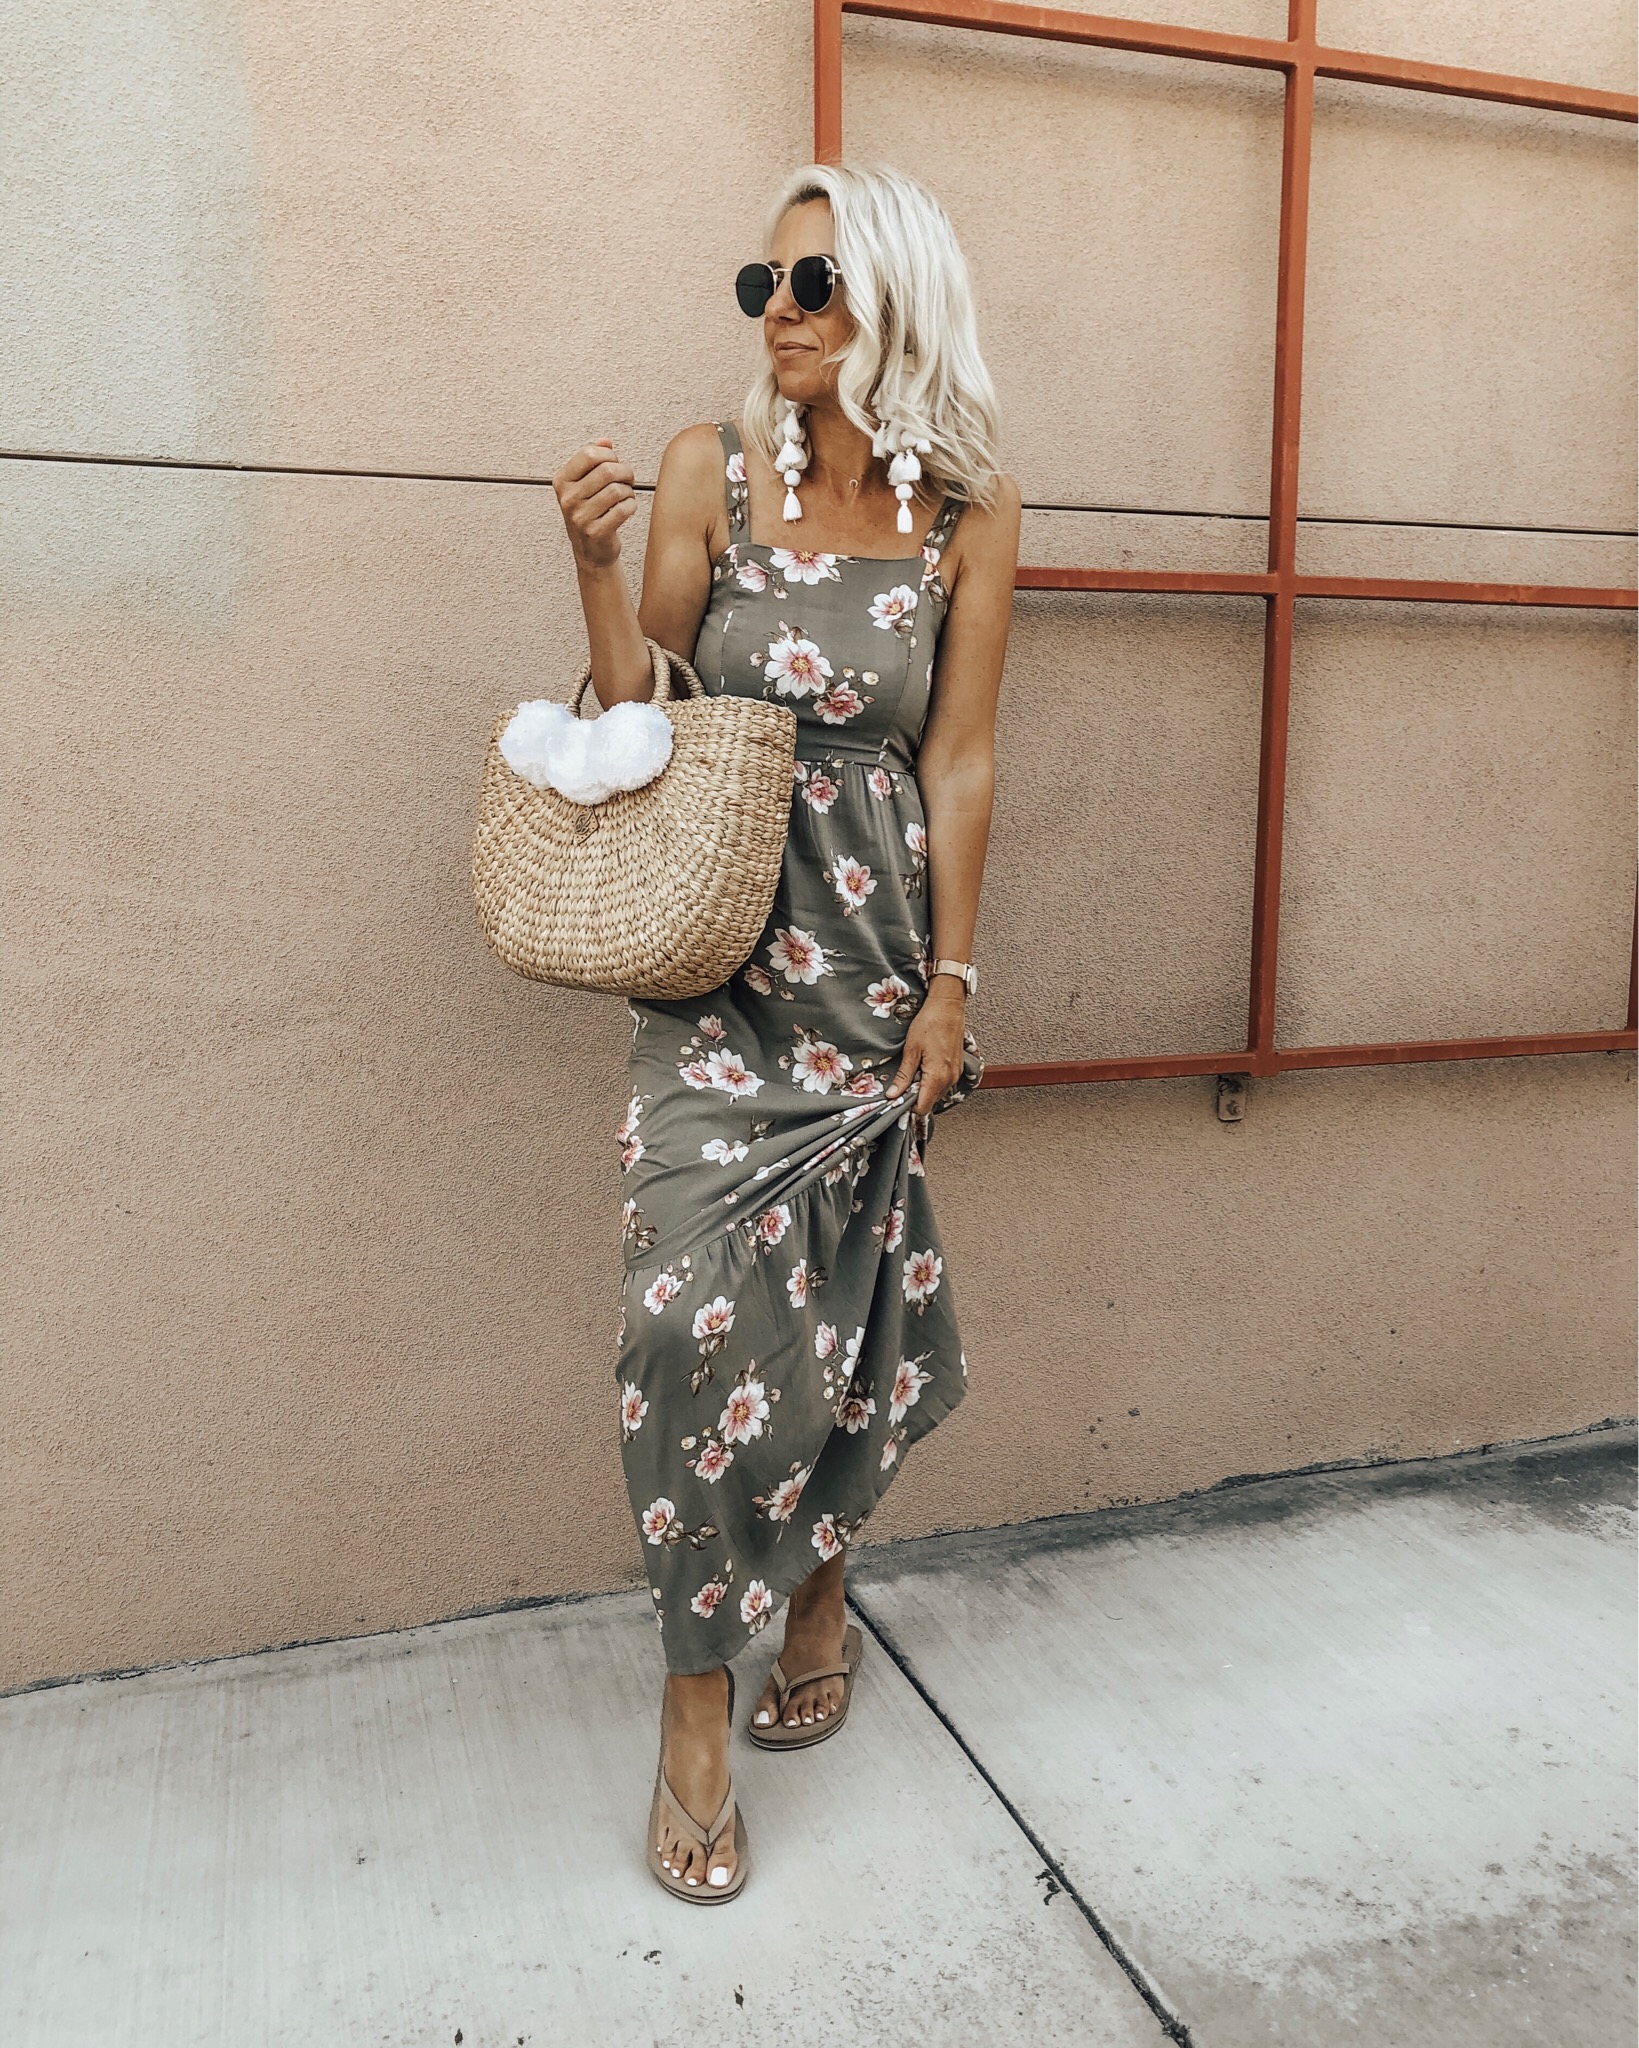 NEW SPRING DRESSES + JUMPSUITS FROM TARGET - Jaclyn De Leon Style + Looking for the perfect Spring dress at an affordable price? I'm sharing my top picks from pretty florals to retro stripes and they're all from Target.